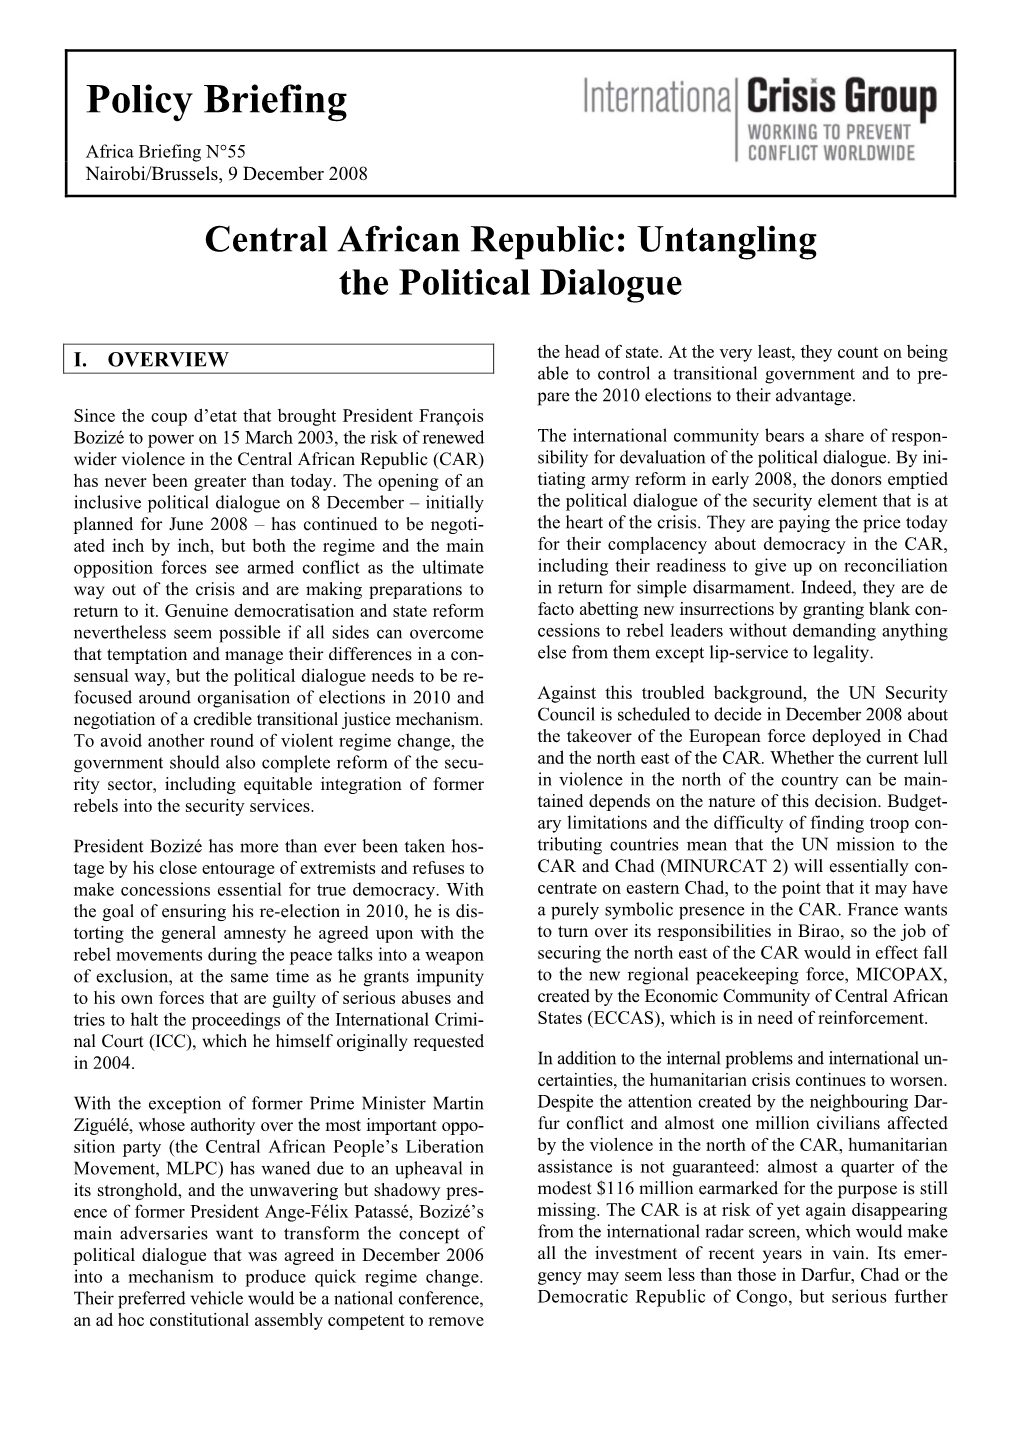 Central African Republic: Untangling the Political Dialogue